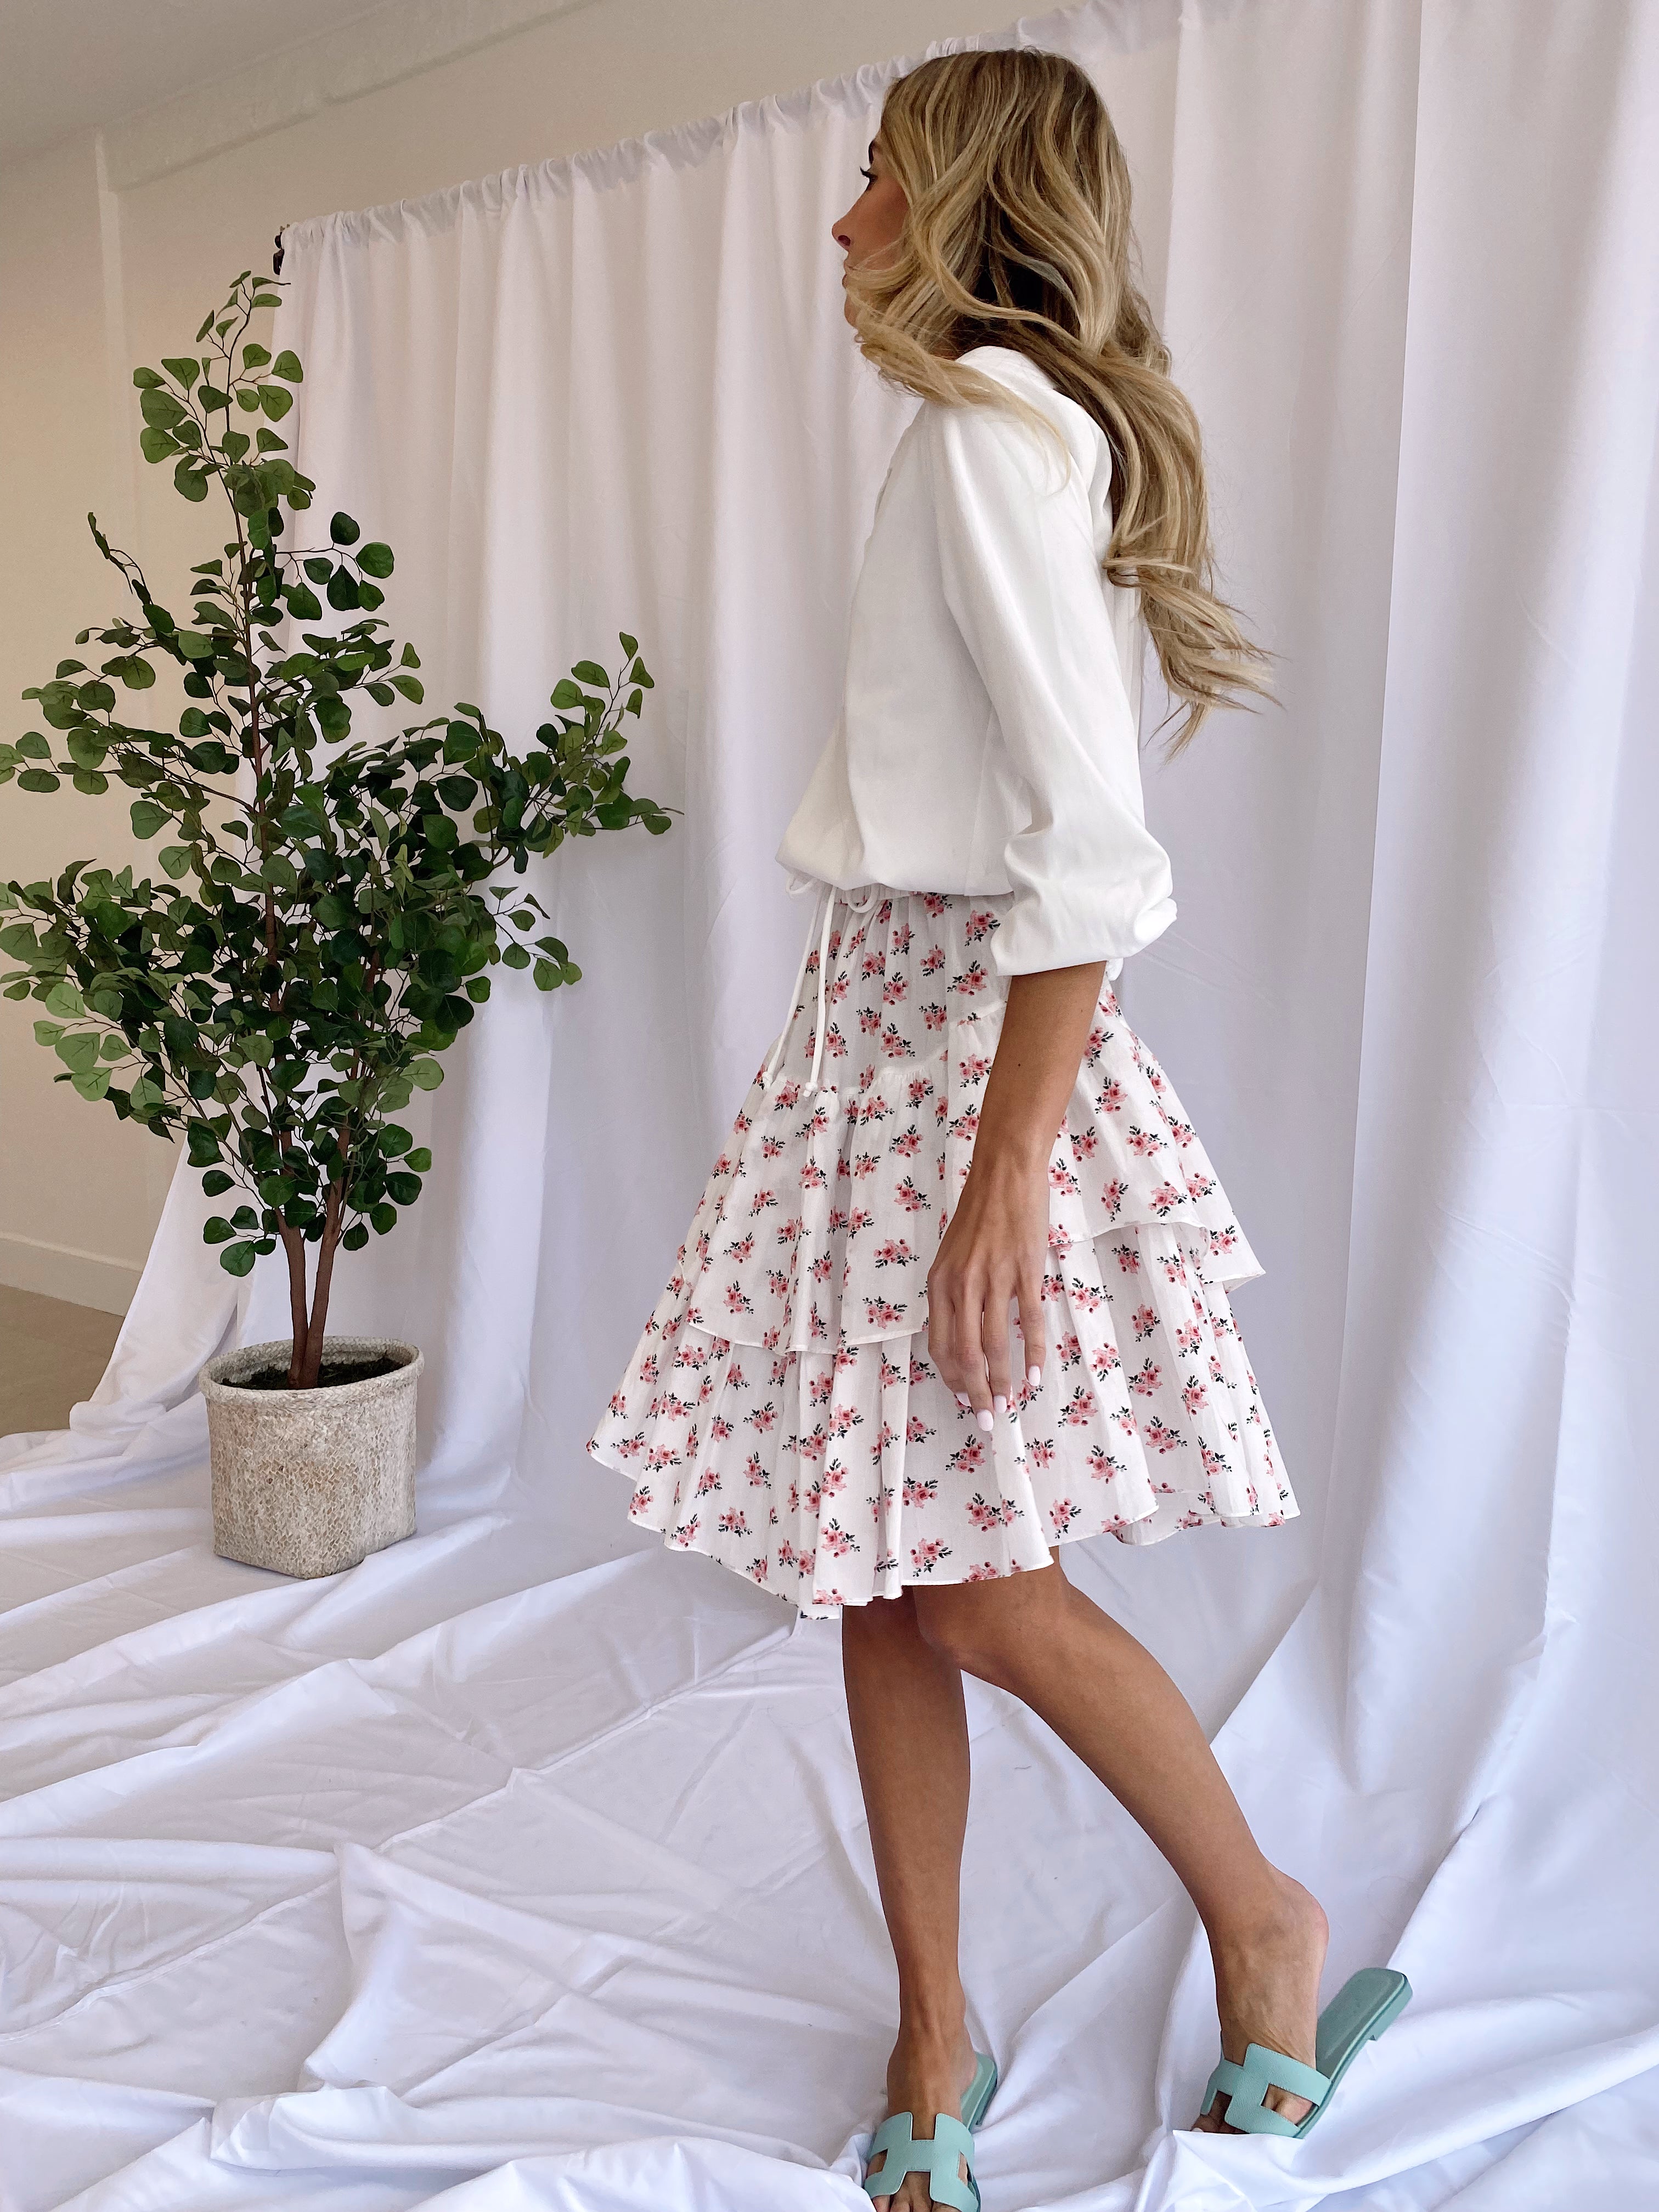 The Pink Floral Tier Skirt